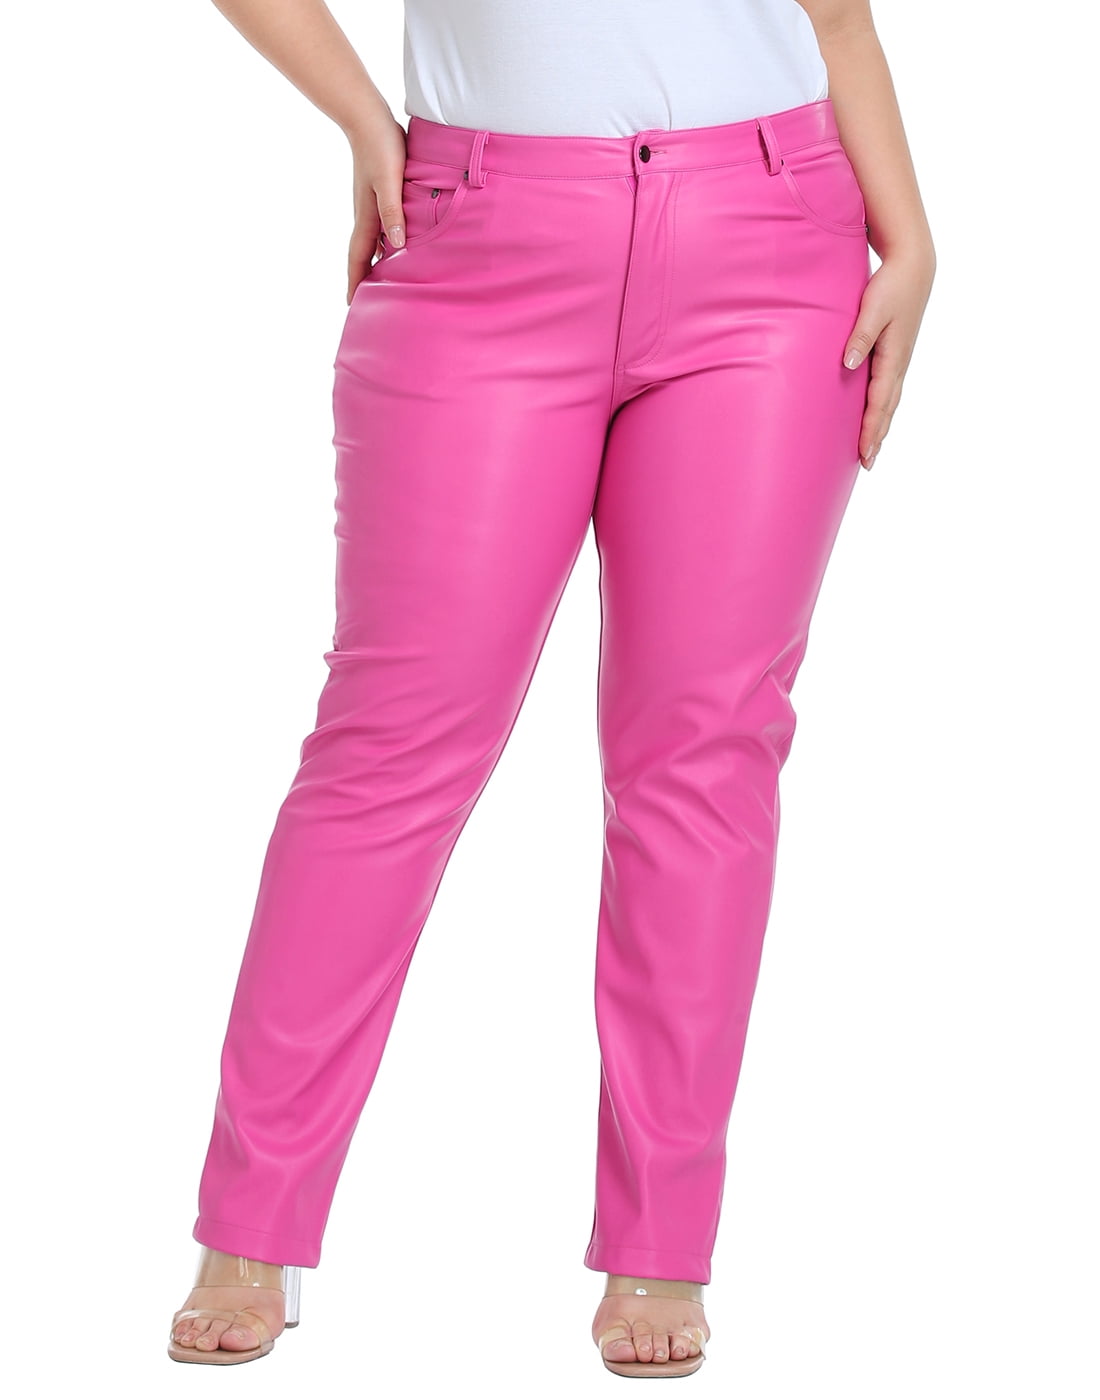 Hot Pink Pants Smart Casual Outfits For Women (74 ideas & outfits) |  Lookastic